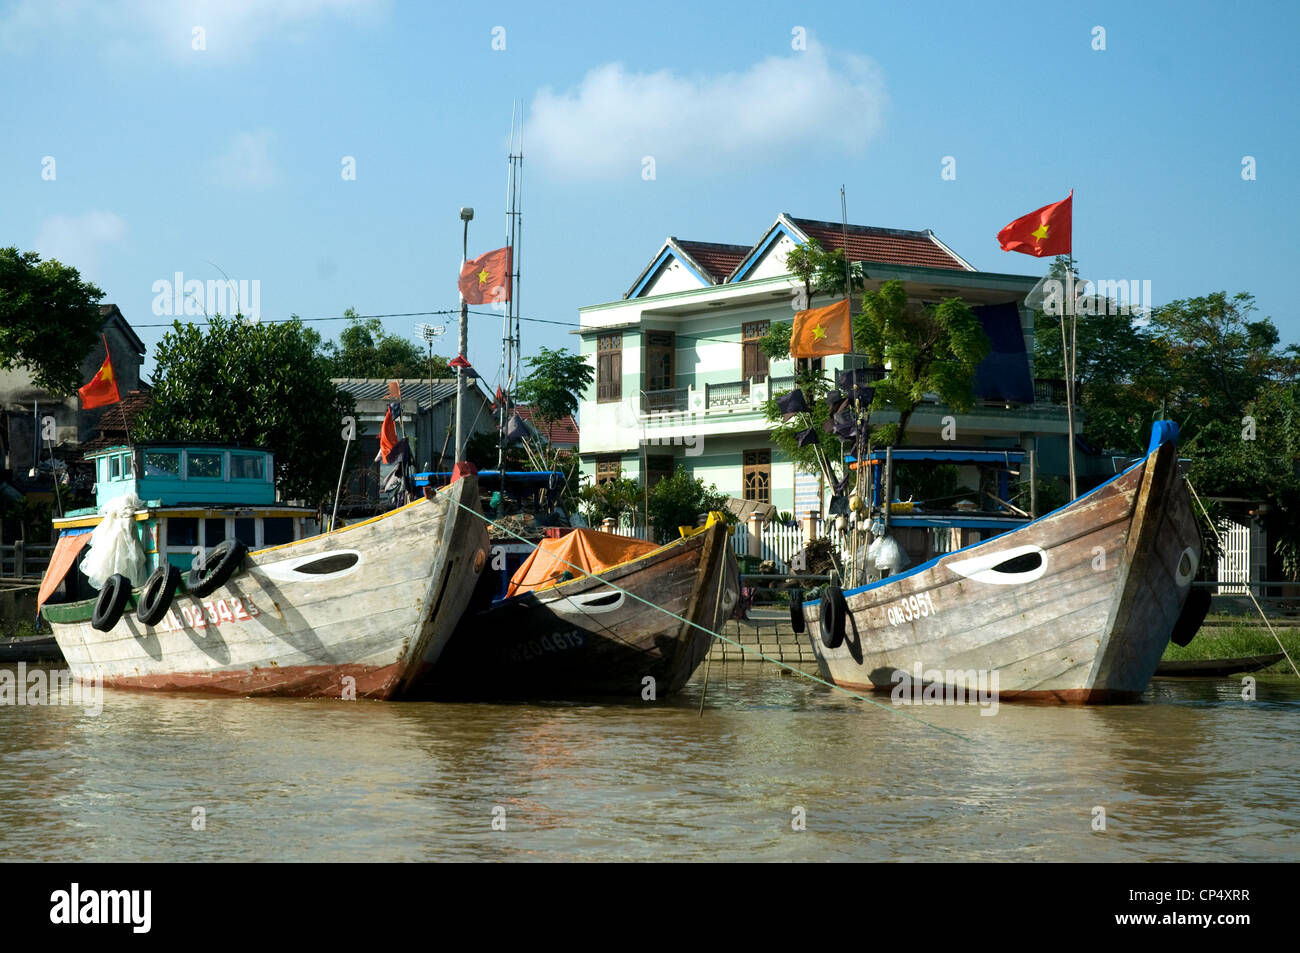 In Vietnam's Hoi An, an historic trading port, modern fishing boats are moored along the Thu Bon river Stock Photo